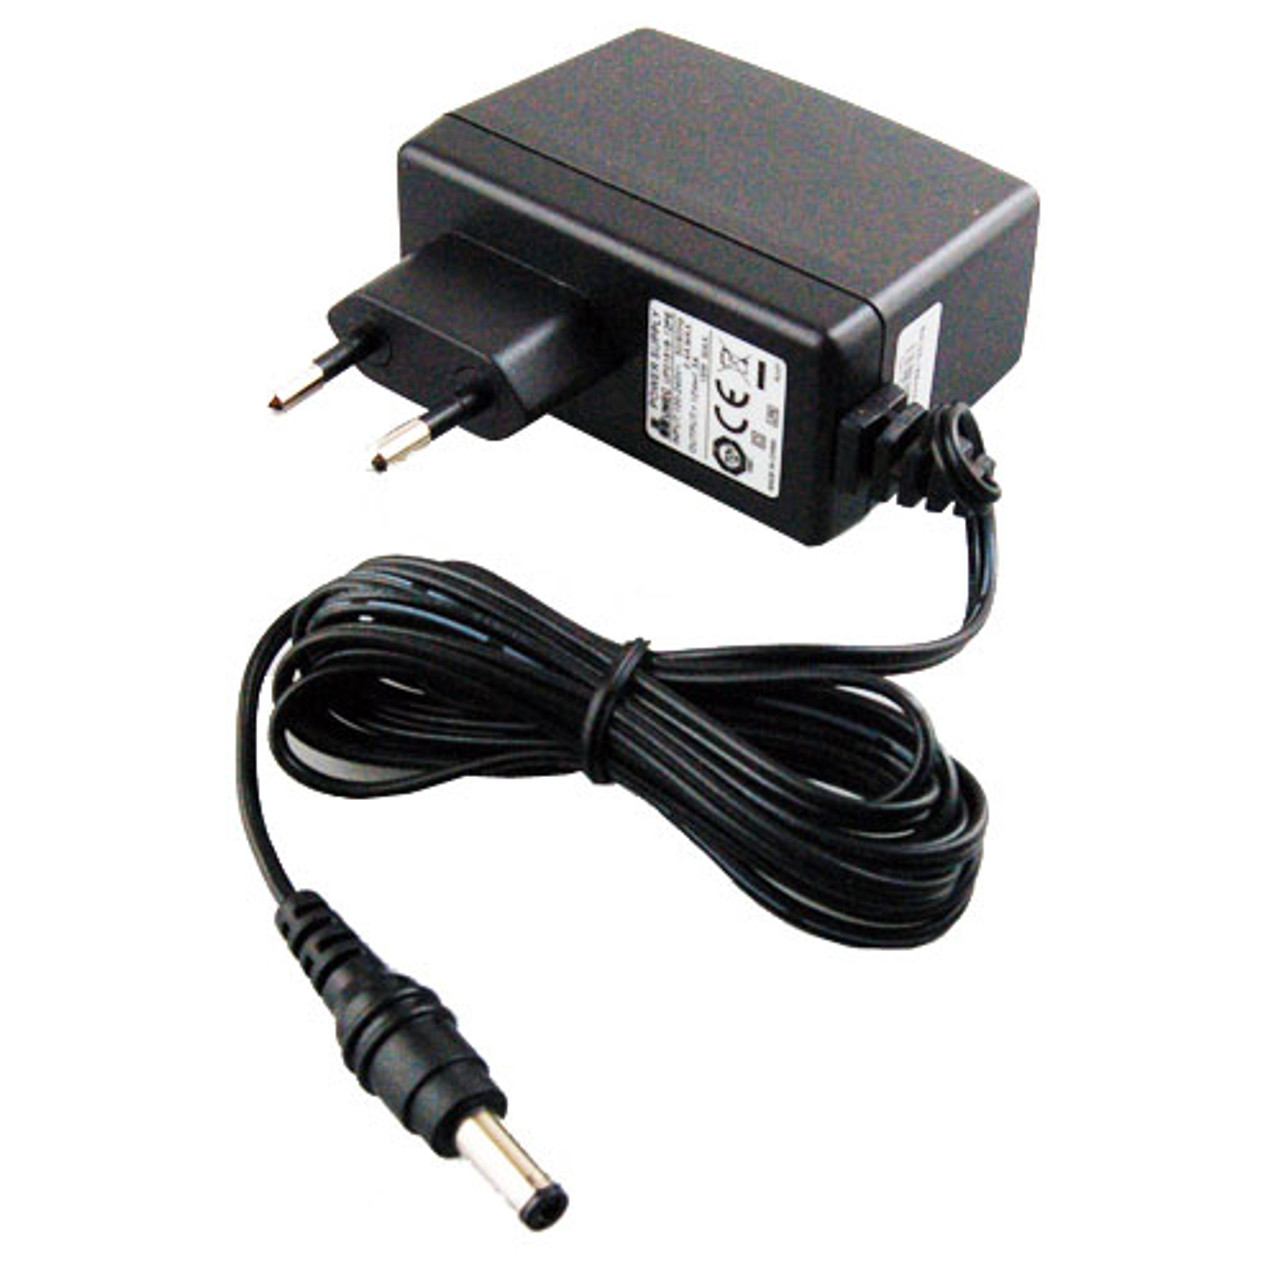 ACEU-12V - AC input power adapter for and FMC series converters, EU round pins